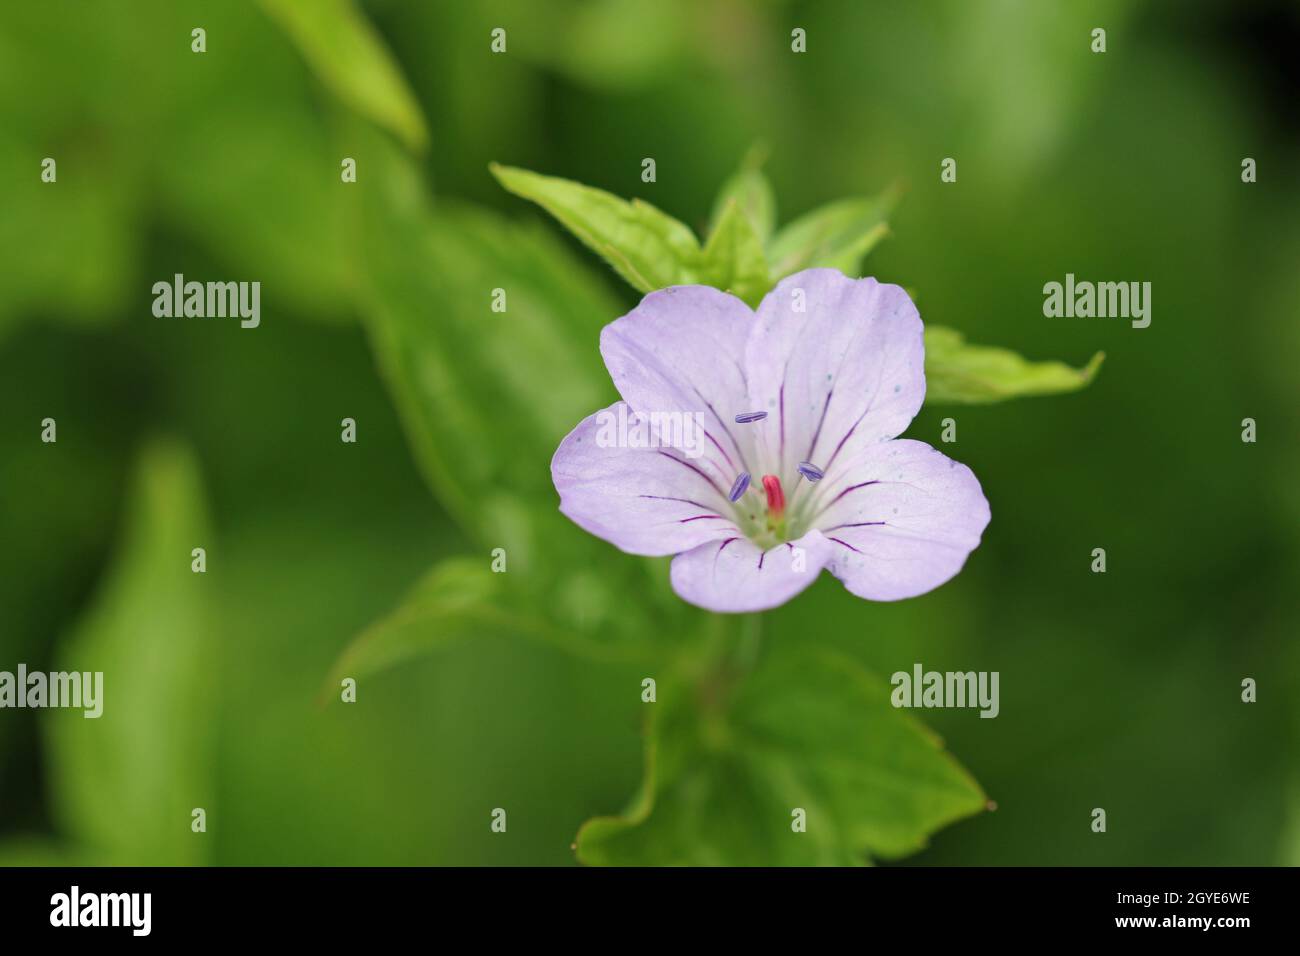 Lilac knotted cranesbill, Geranium nodosum variety Svelte Lilac, flower close up with a background of blurred leaves. Stock Photo